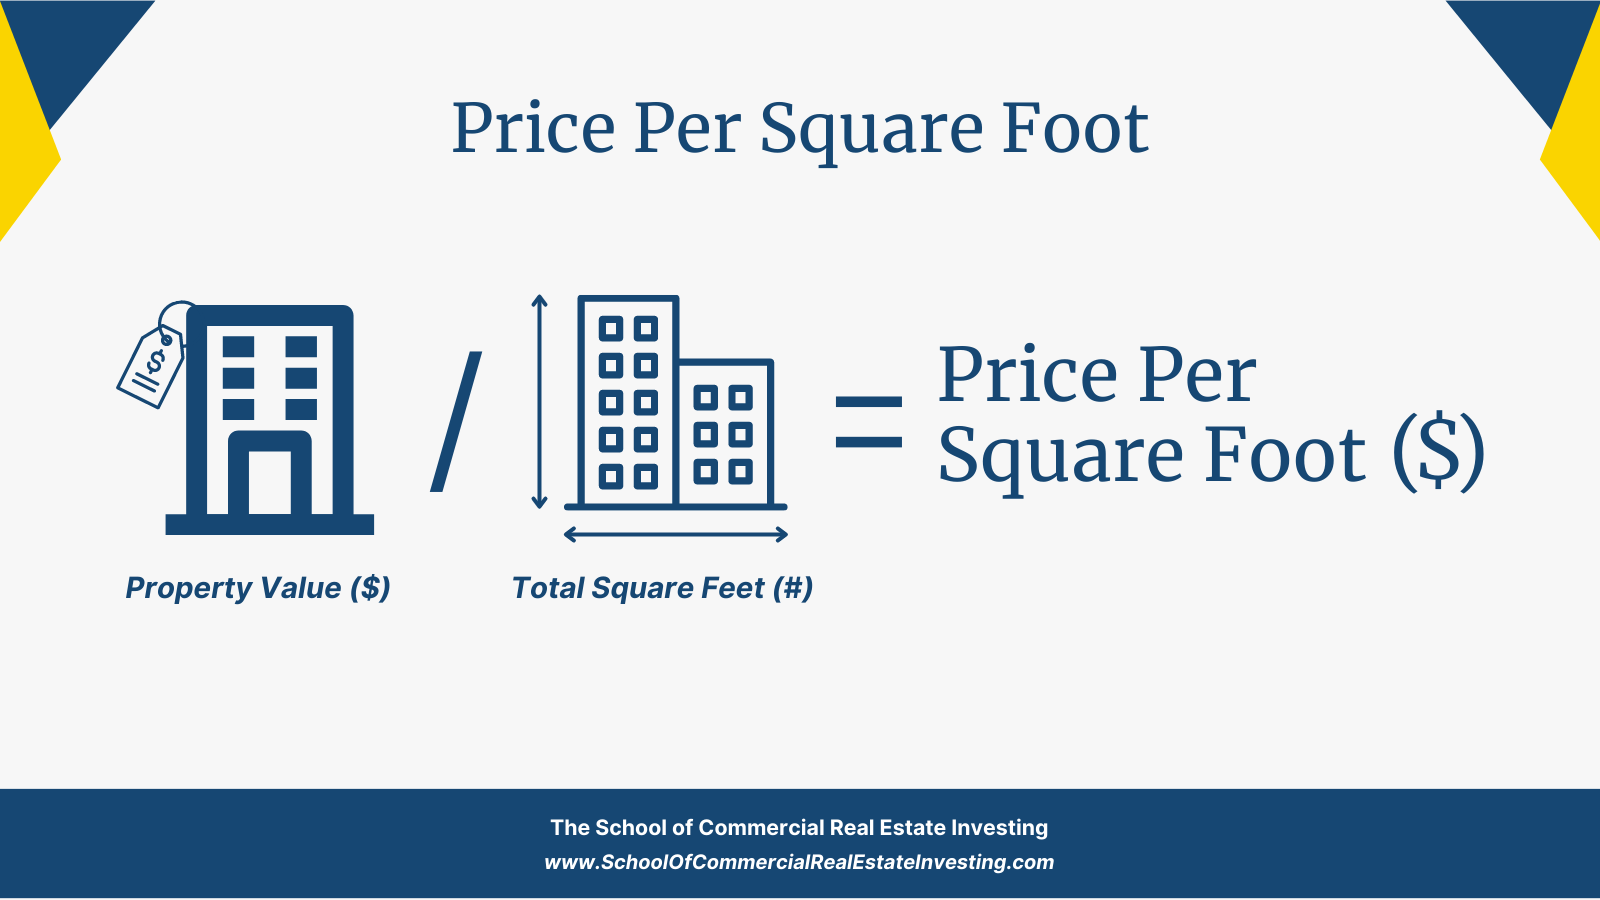 Calculate Price Per Square Foot by dividing the property's value by its total square footage.